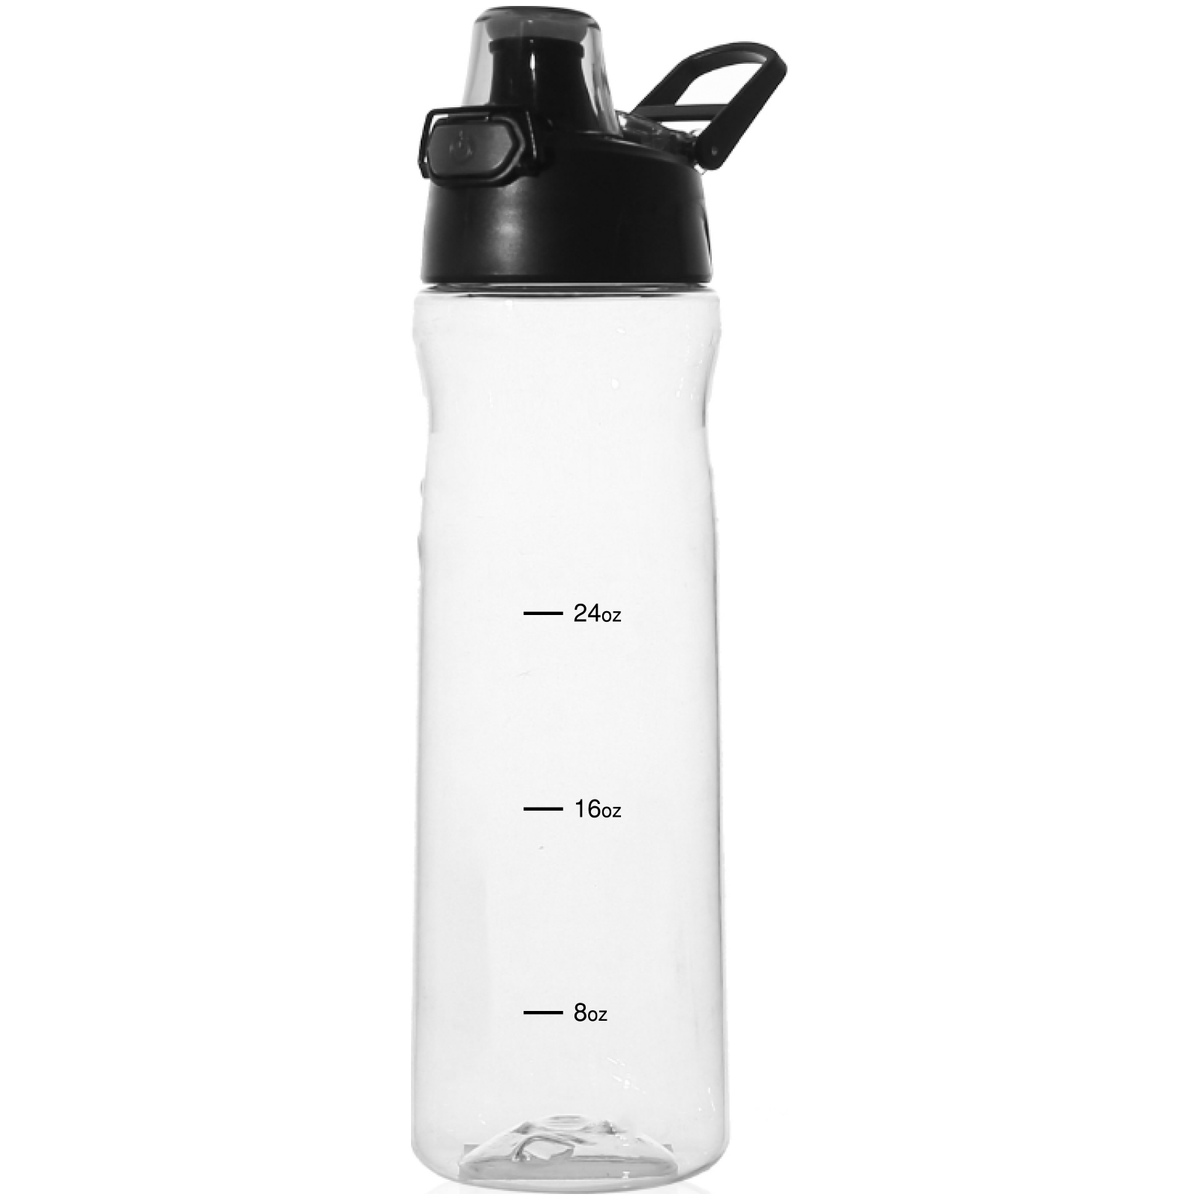 A clear plastic, BPA-free water bottle with a black screw-on lid and a flip-top spout. It has measurement markings for 8 oz, 16 oz, and 24 oz, making it ideal for tracking your Bala Enzyme The Bala Bottle consumption effortlessly.